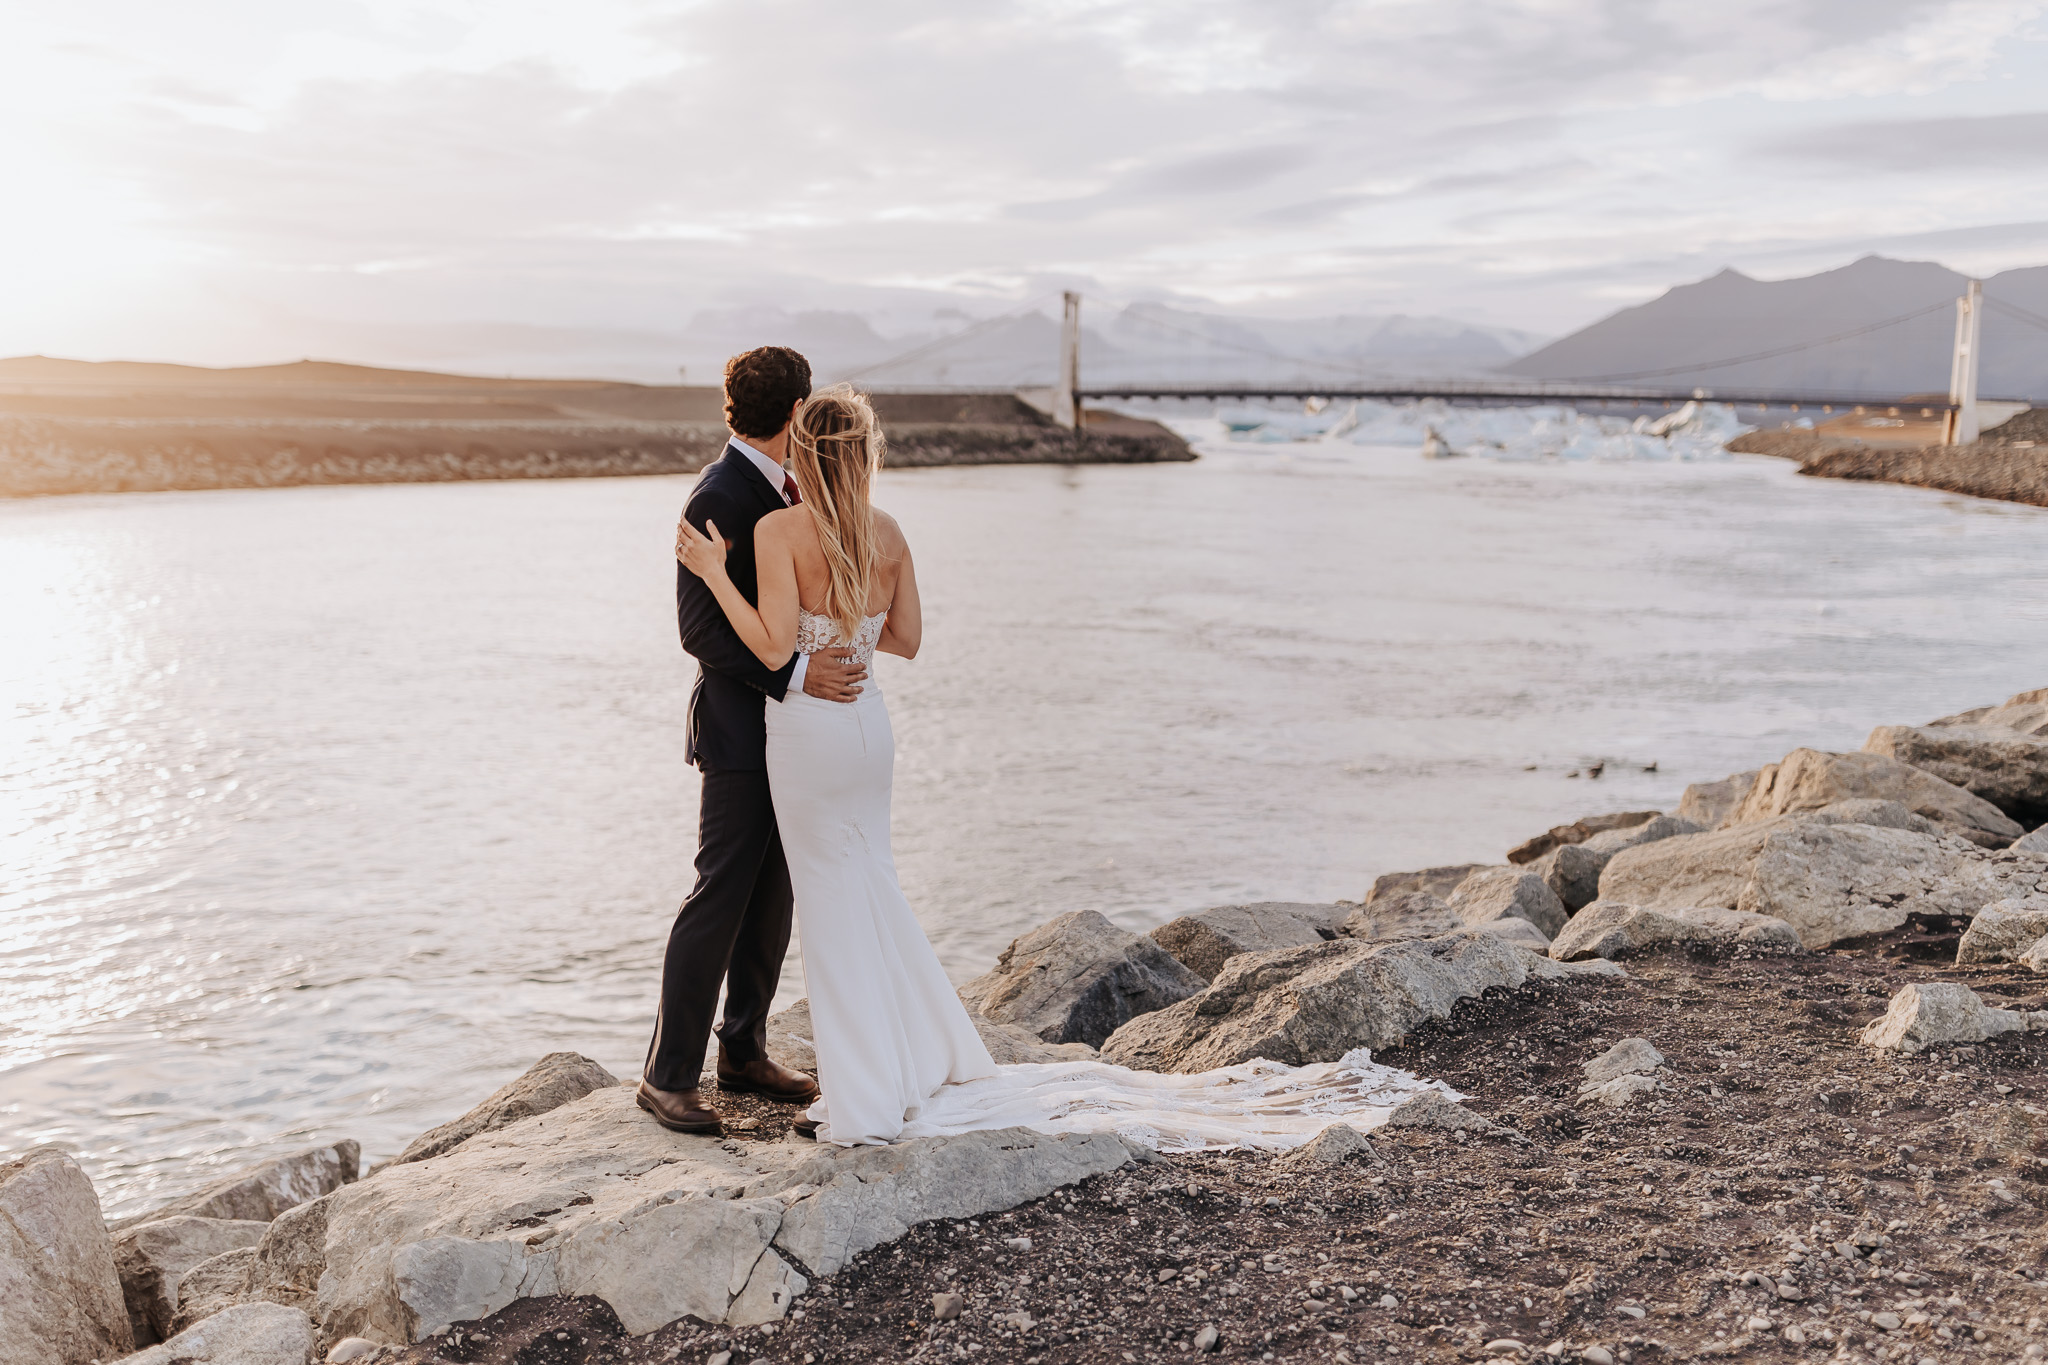 Iceland elopement photographer captures couple embracing after traveling to Iceland for their destination elopement